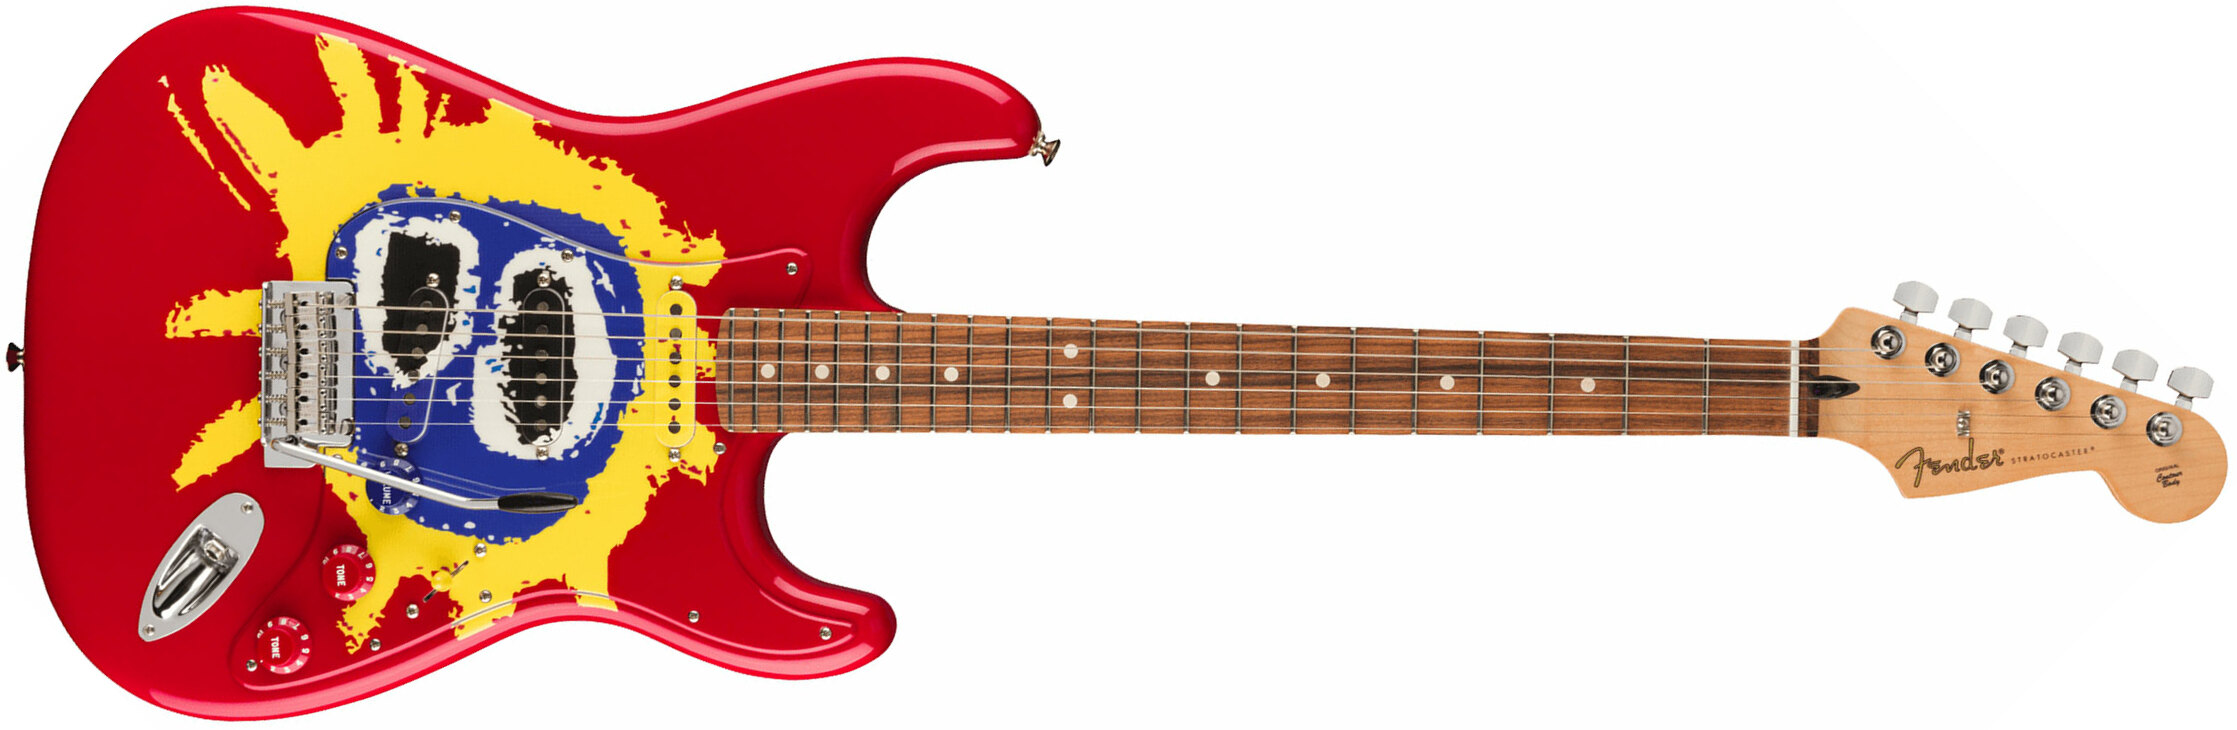 Fender Strat 30th Anniversary Screamadelica Ltd Mex 3s Trem Pf - Red Blue Yellow - Str shape electric guitar - Main picture